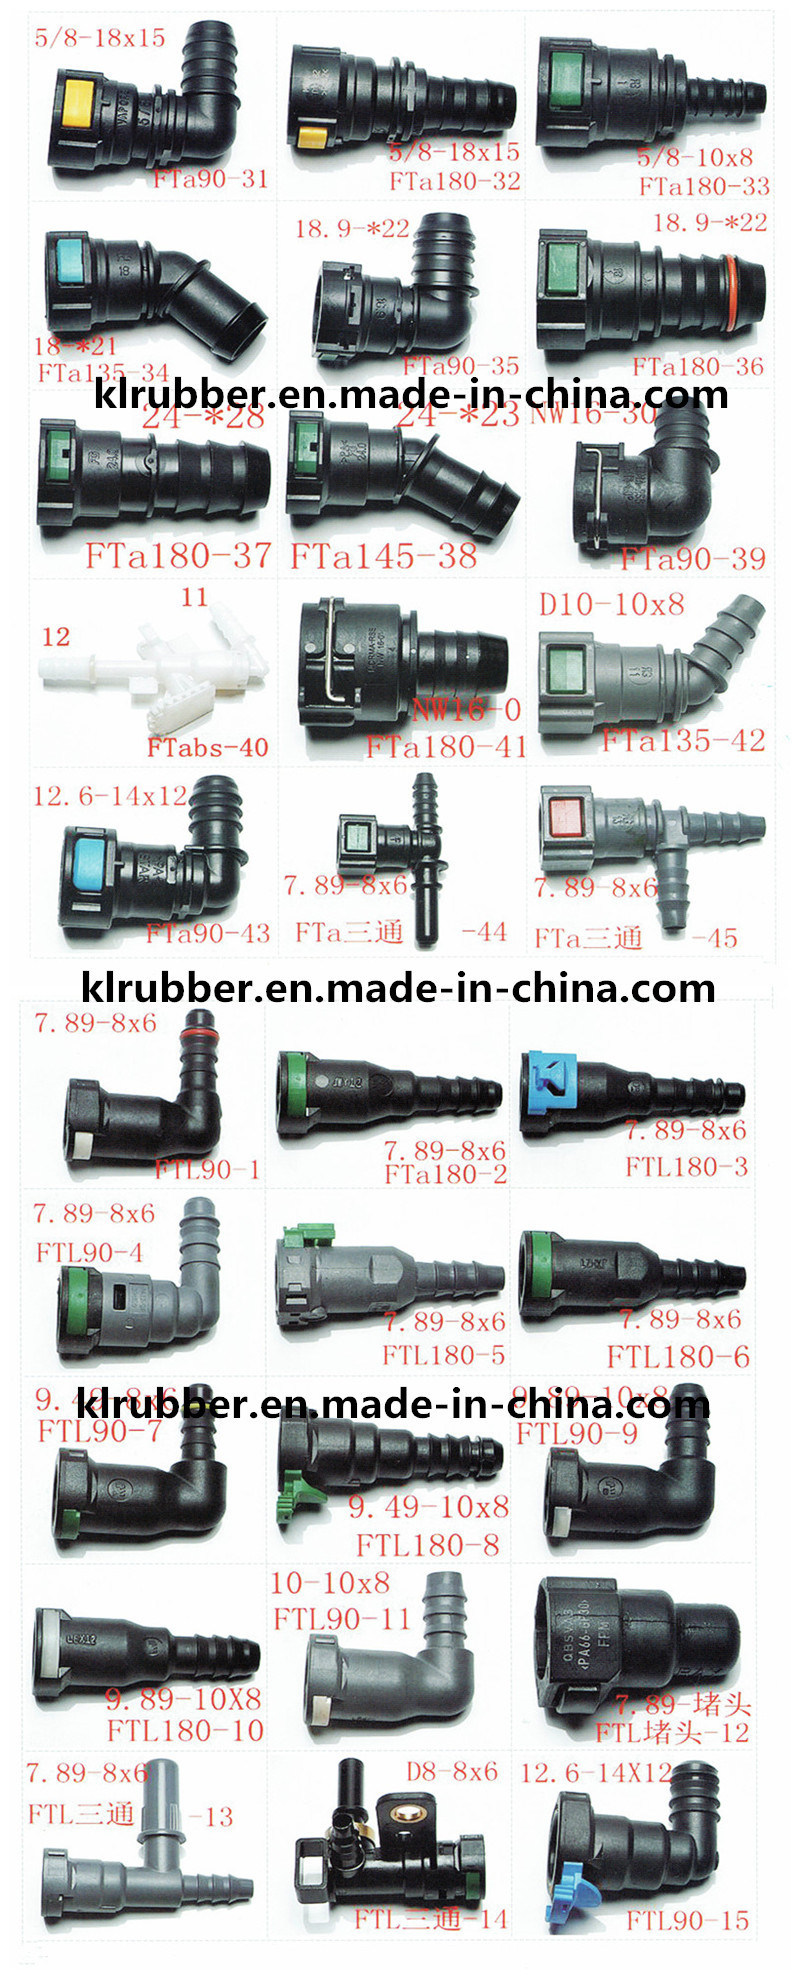 Oil Resistant Plastic Pipe Fitting for Hydraulic Rubber Hose